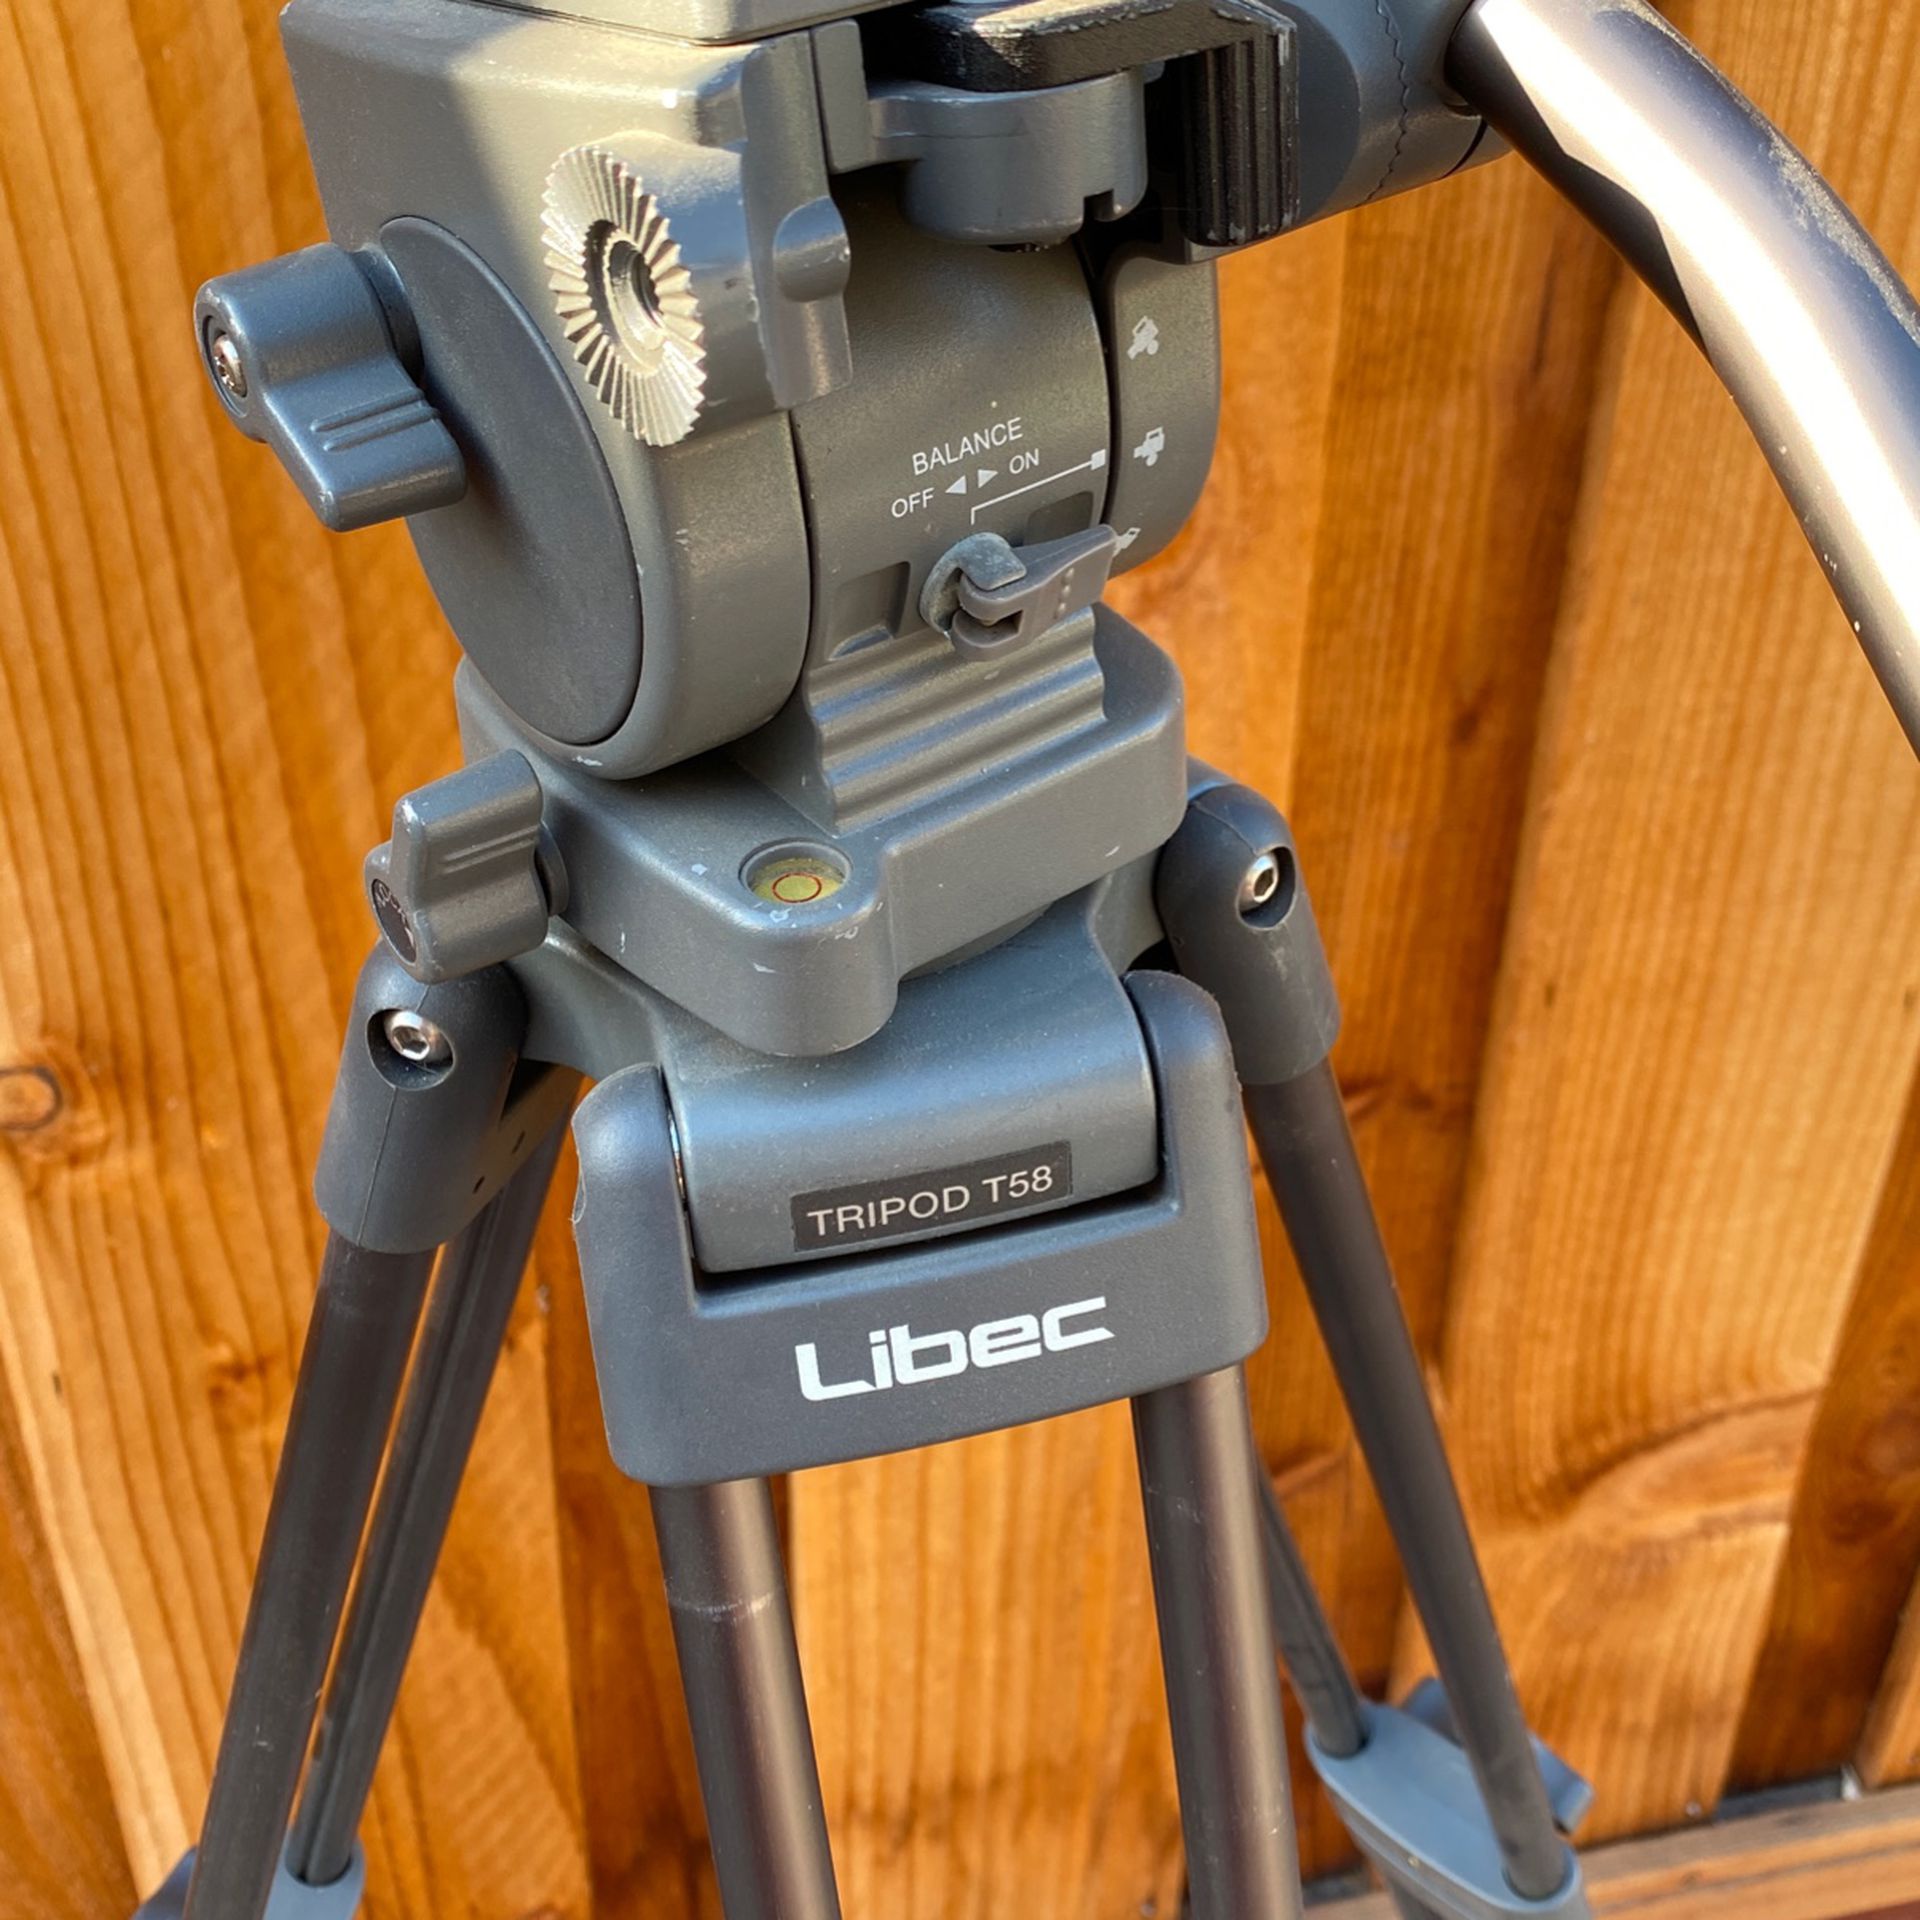 Tripod Libec H22 DV for Sale in Tracy, CA - OfferUp